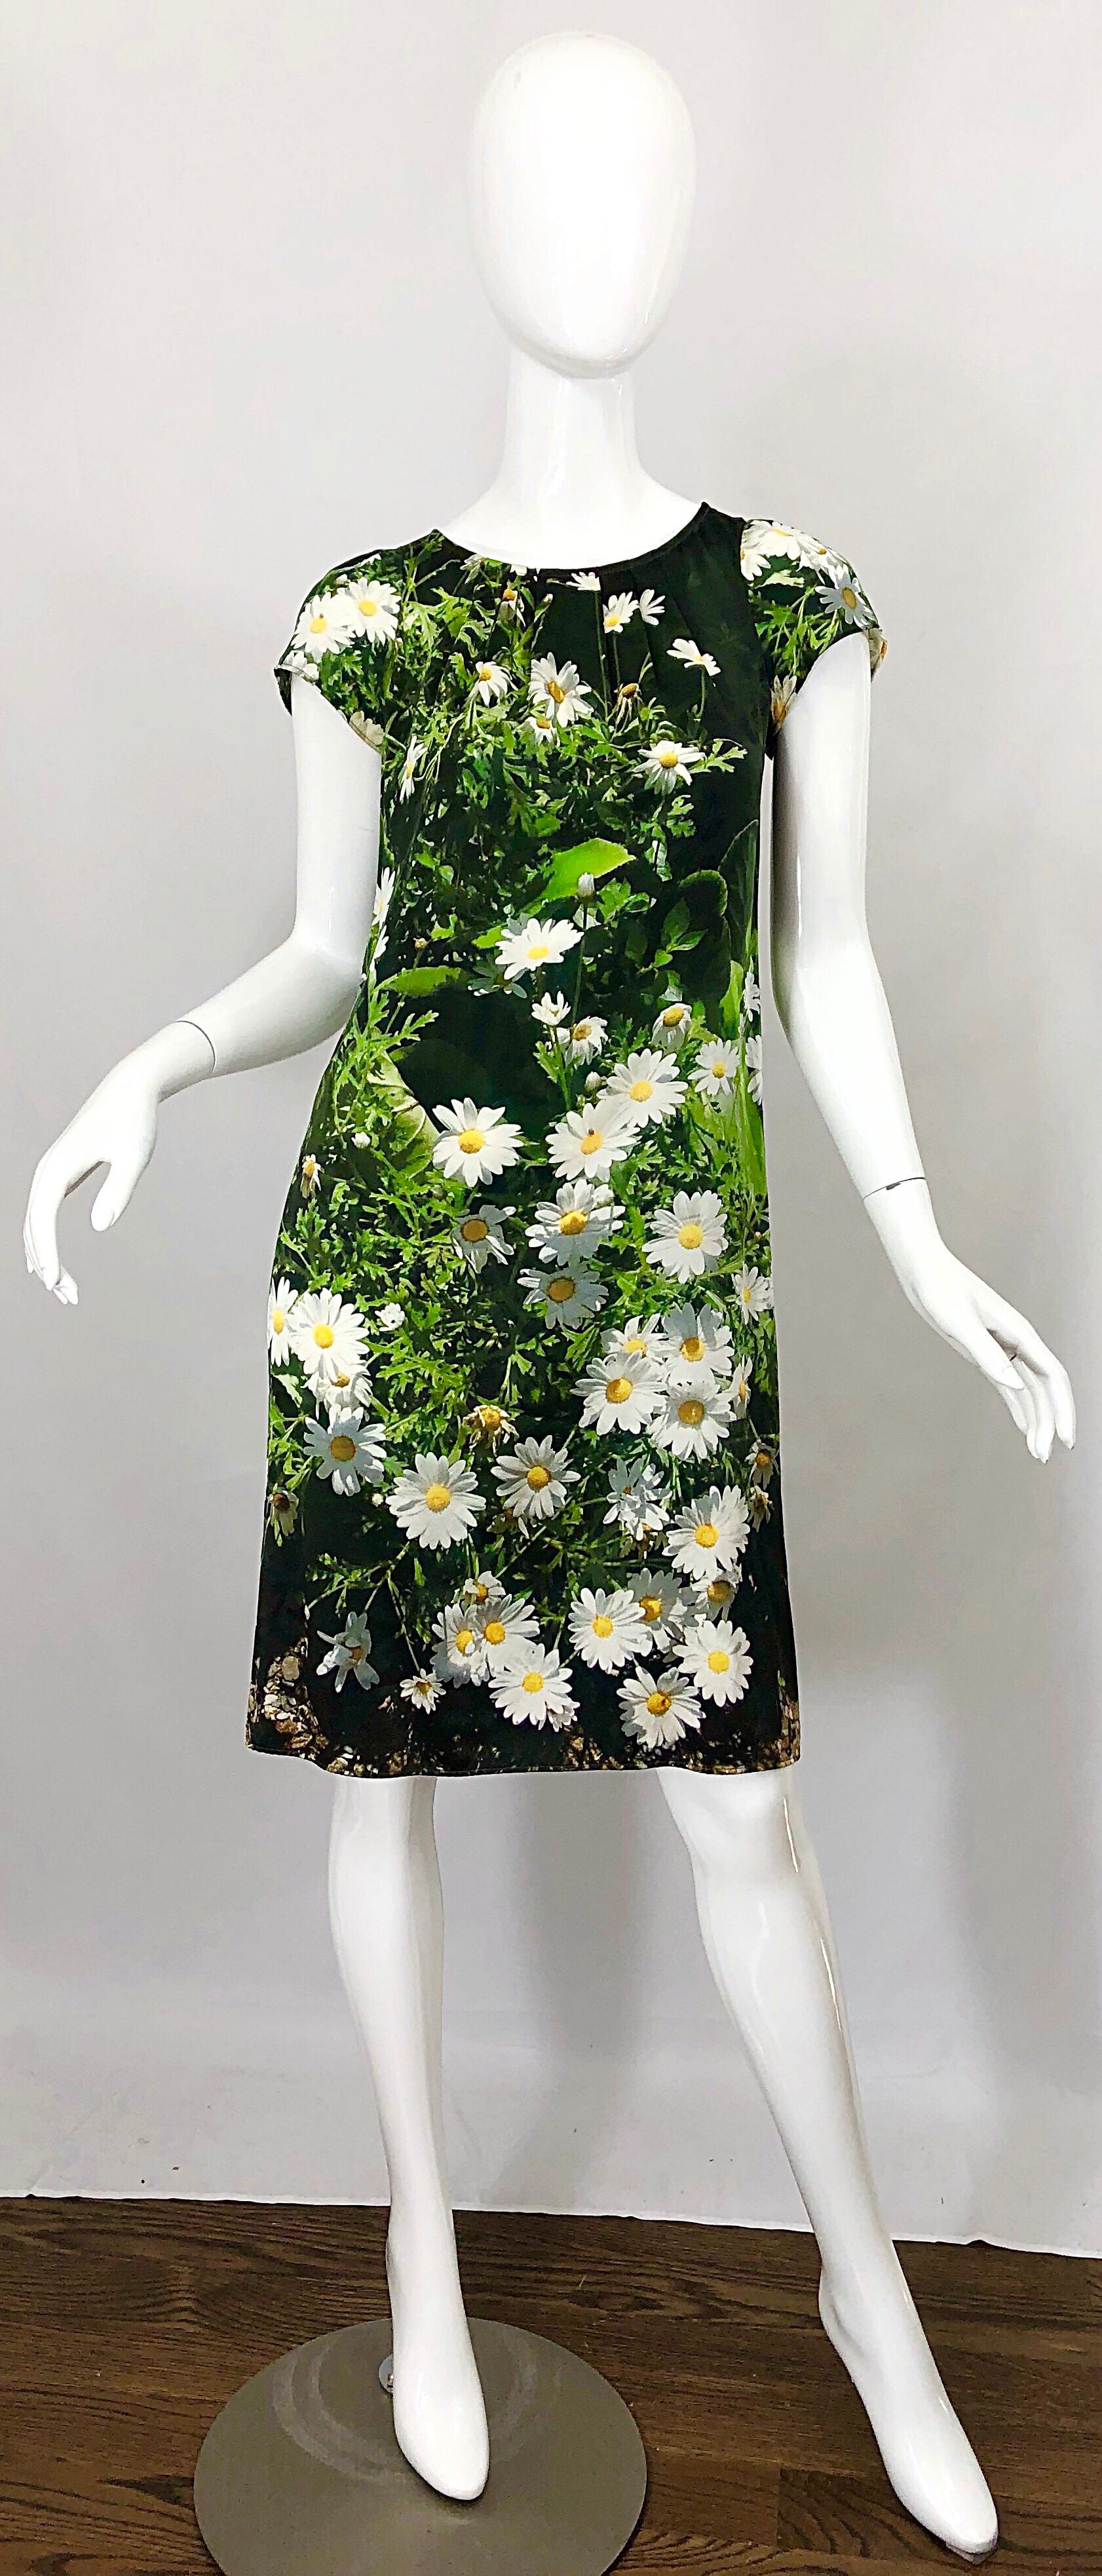 Awesome late 90s AGNES B 3-D daisy print silk smock empire dress! Features vibrant white daisies with vibrant green colored grass and leaves. Super soft luxurious silk. Simply slips over the head. Great belted or alone. The pictured vintage Paloma